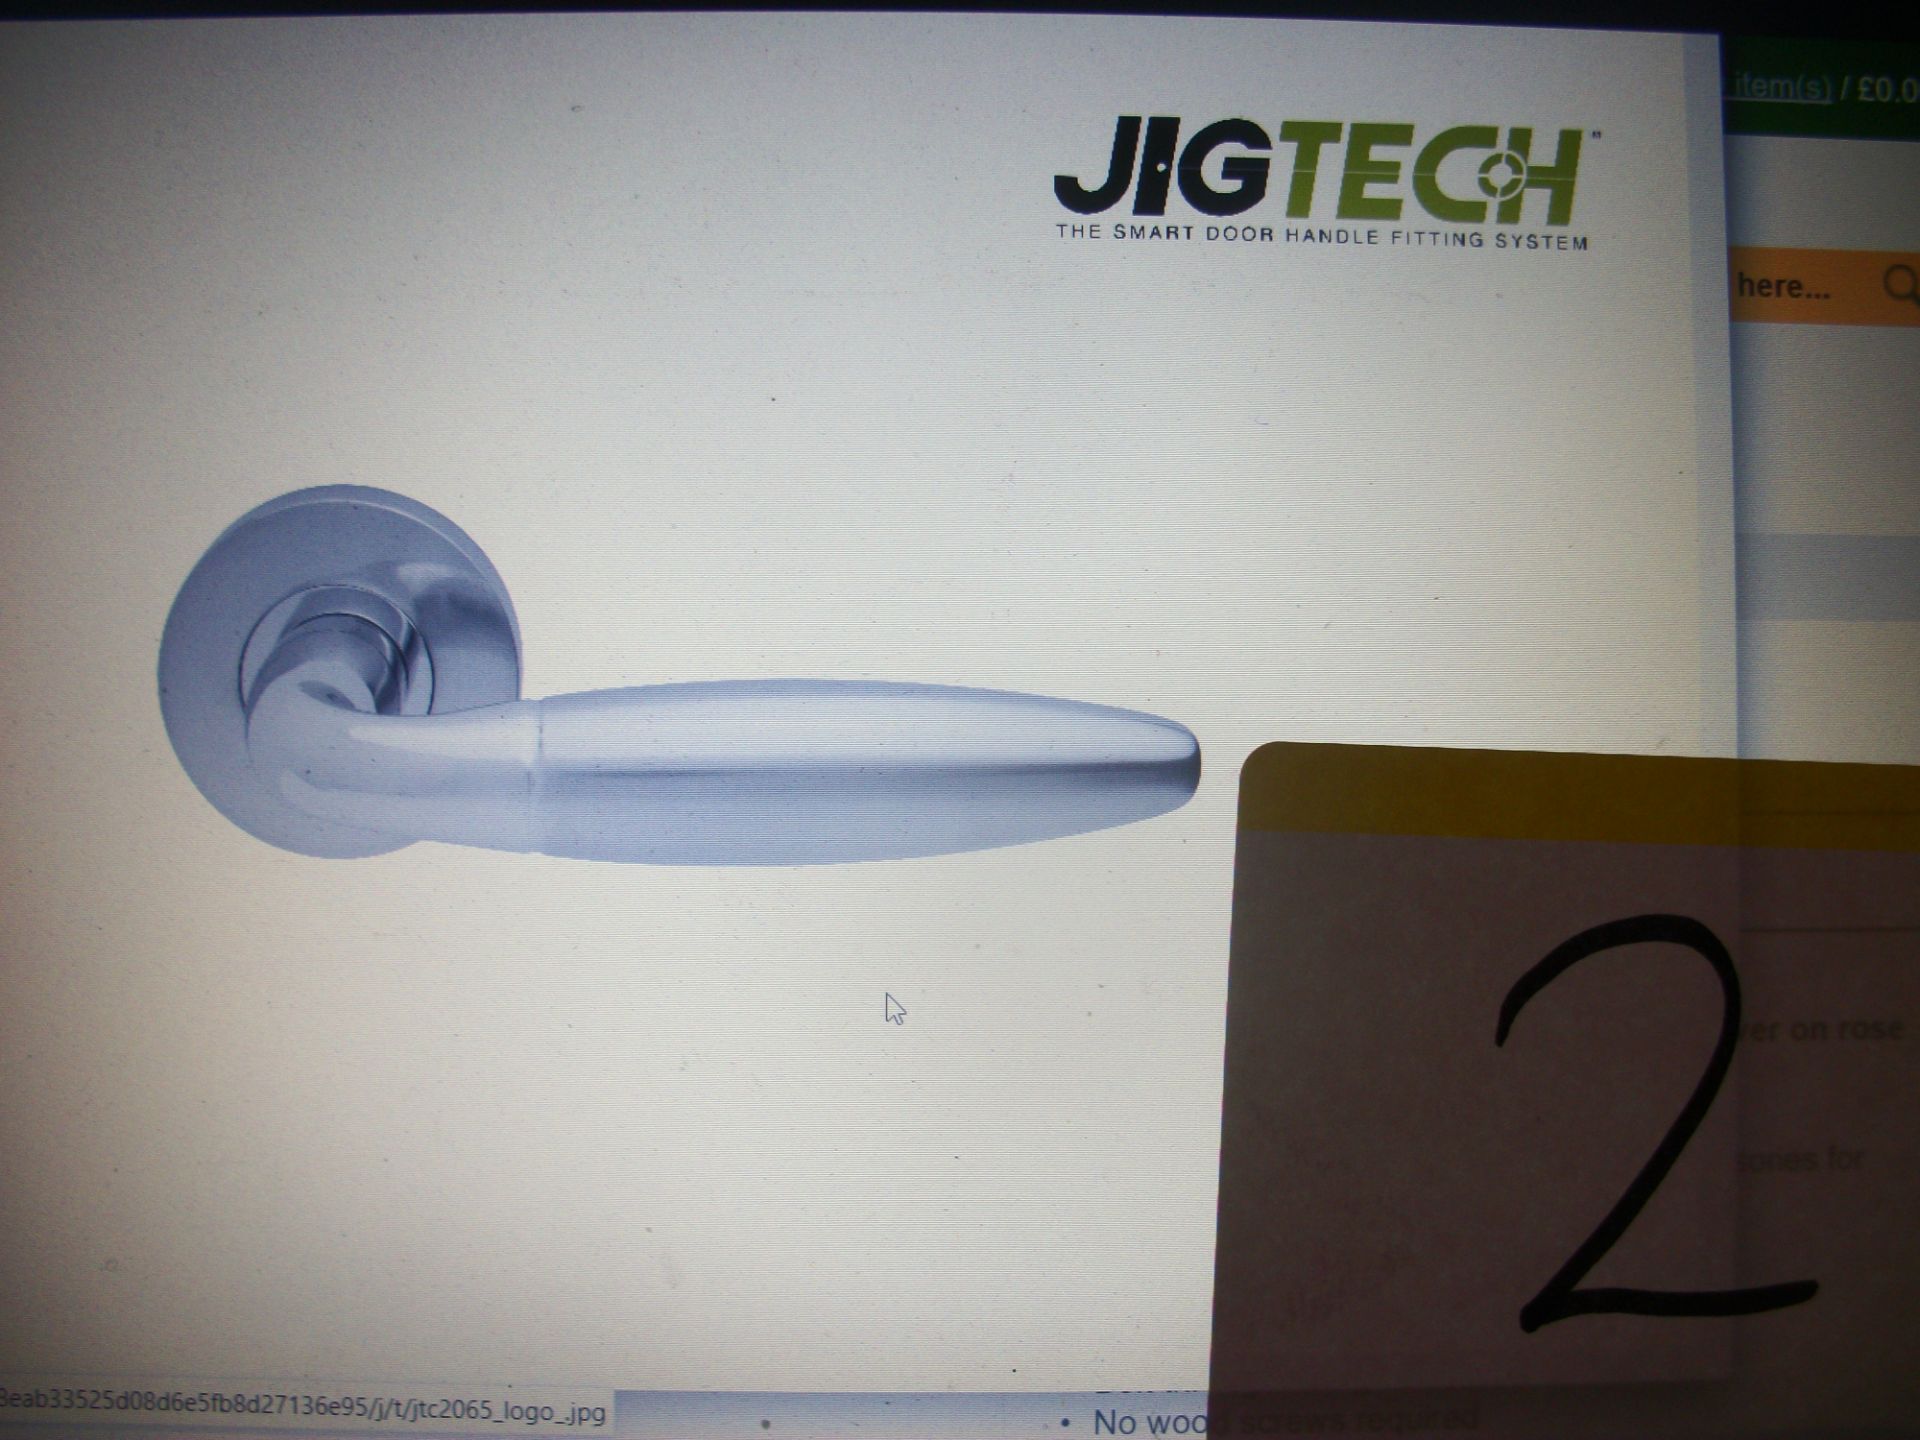 3 Pairs x Jigtech Parma Polished/Satin Chrome Handles - Image 2 of 2